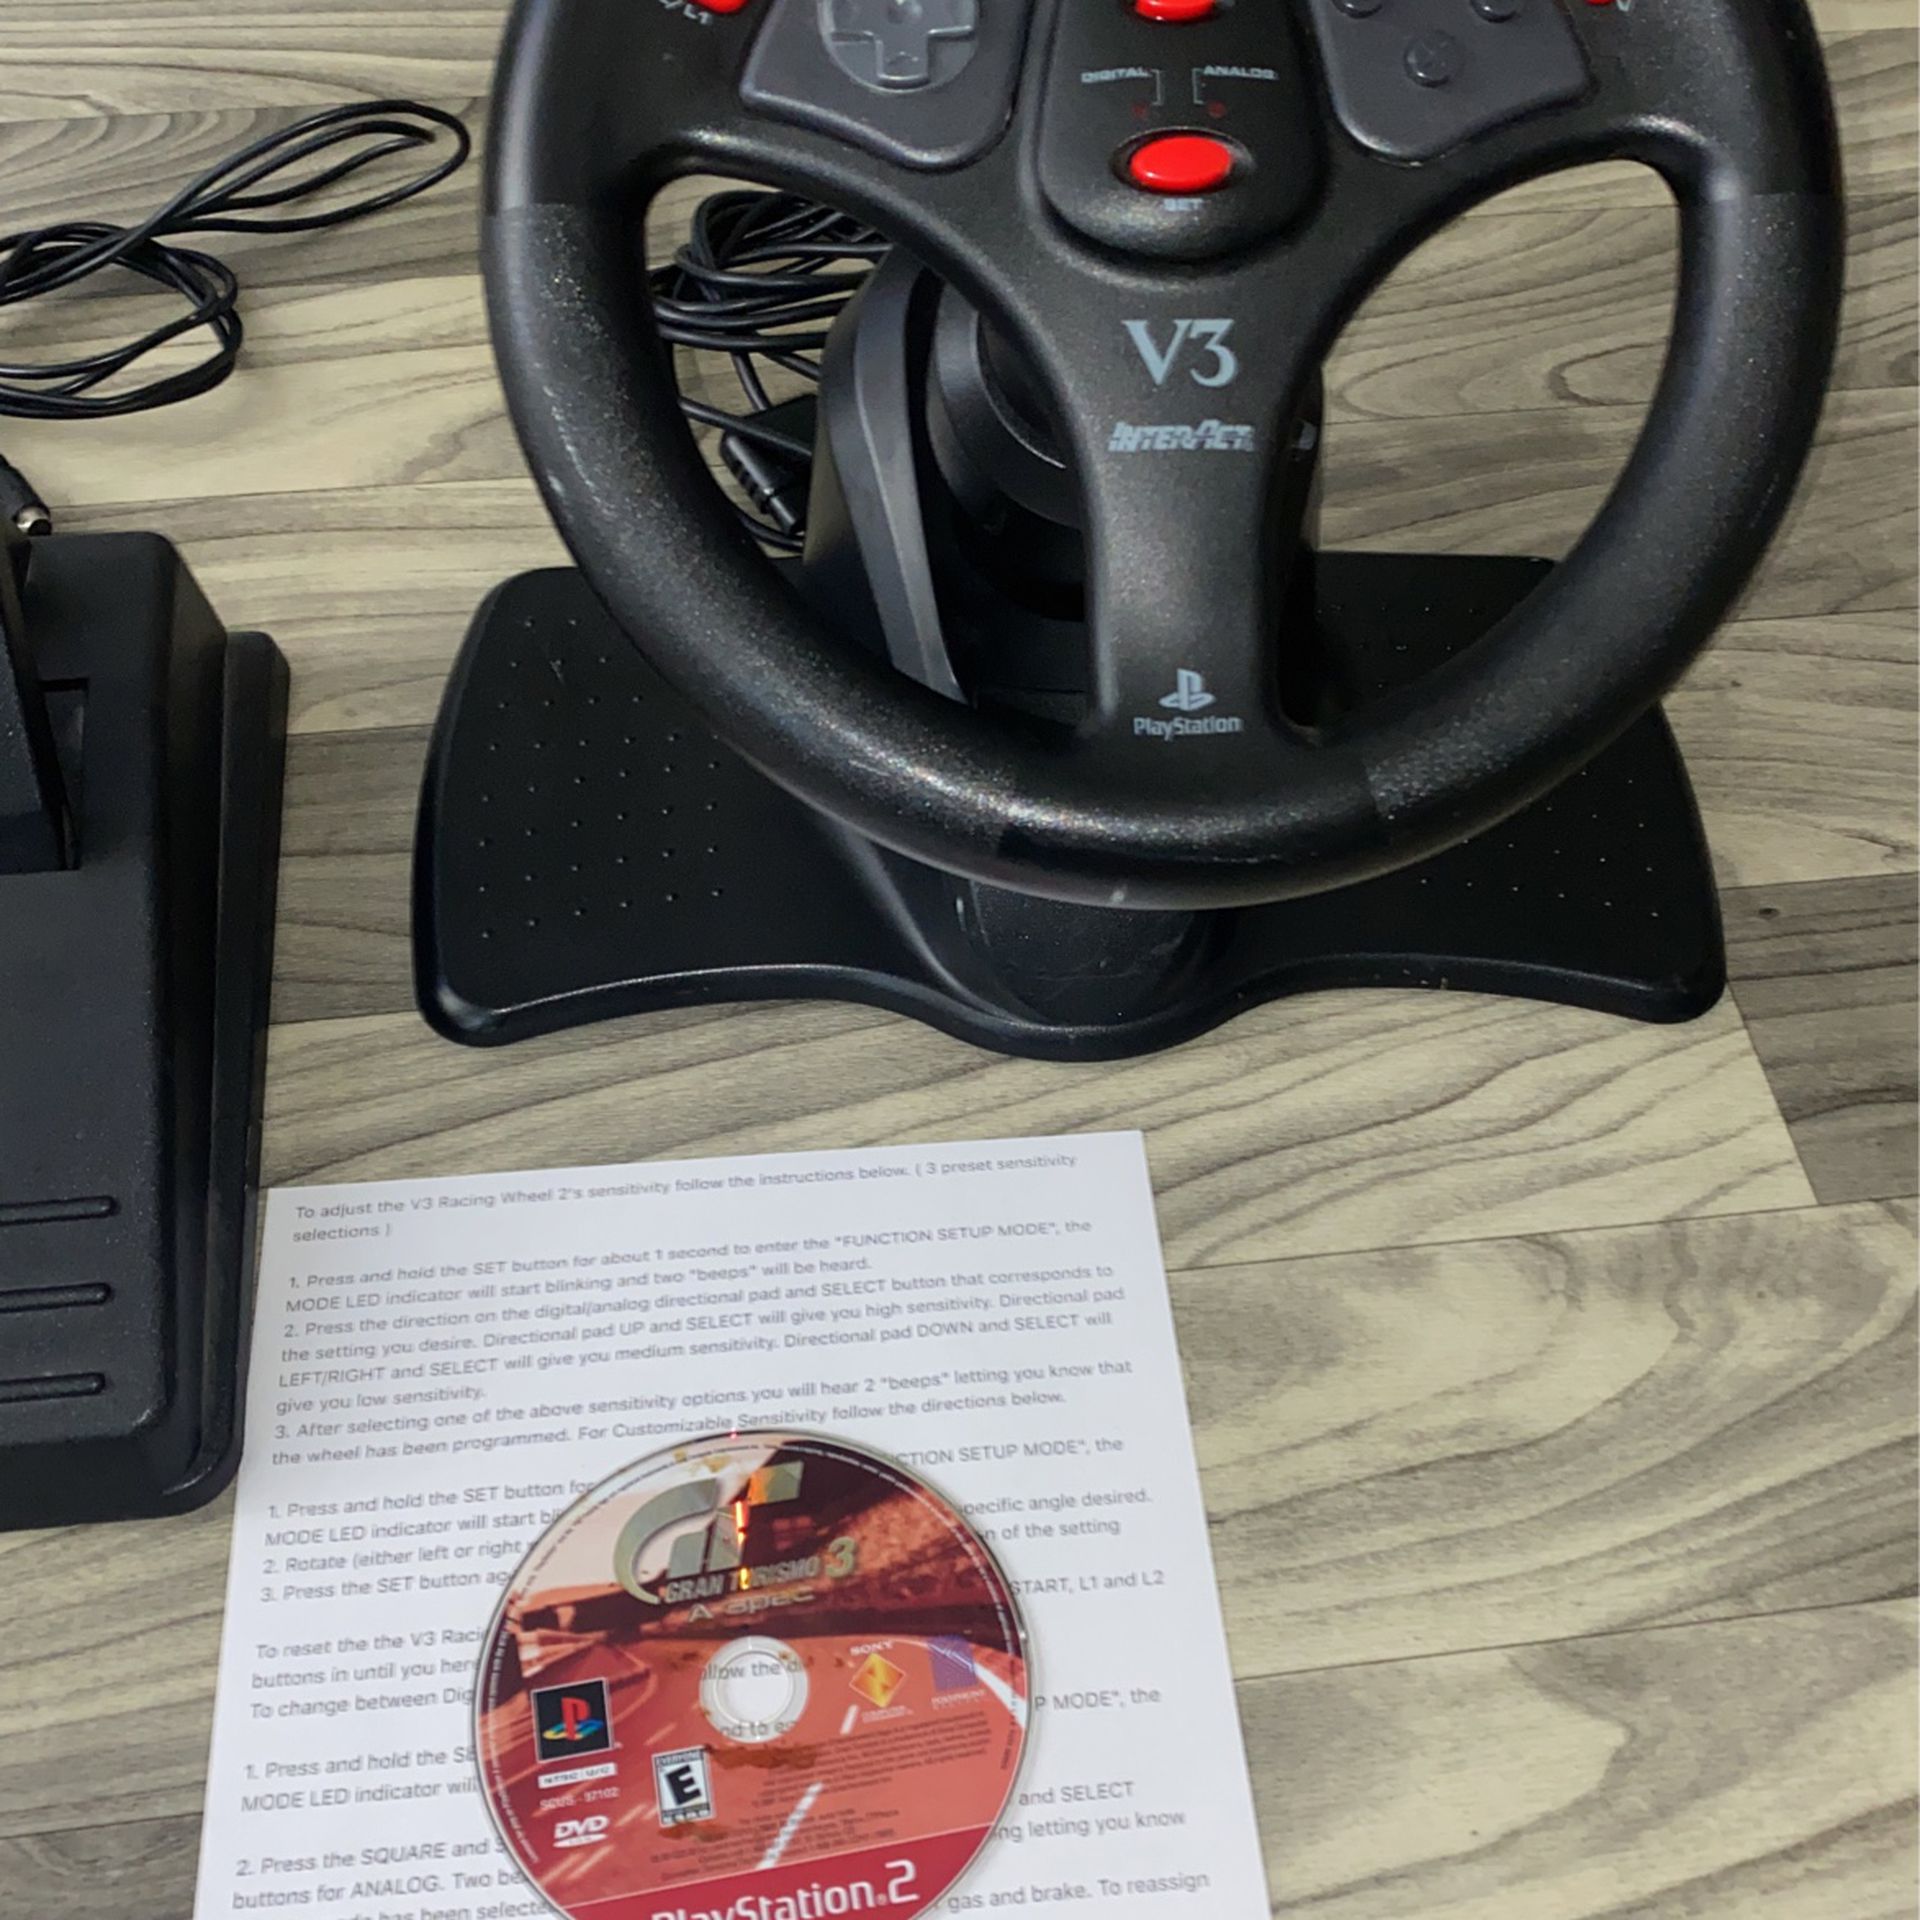 The Logitech G27 is a racing wheel. It supports Playstation4,PlayStation 3,  PlayStation 2 and PC for Sale in Las Cruces, NM - OfferUp